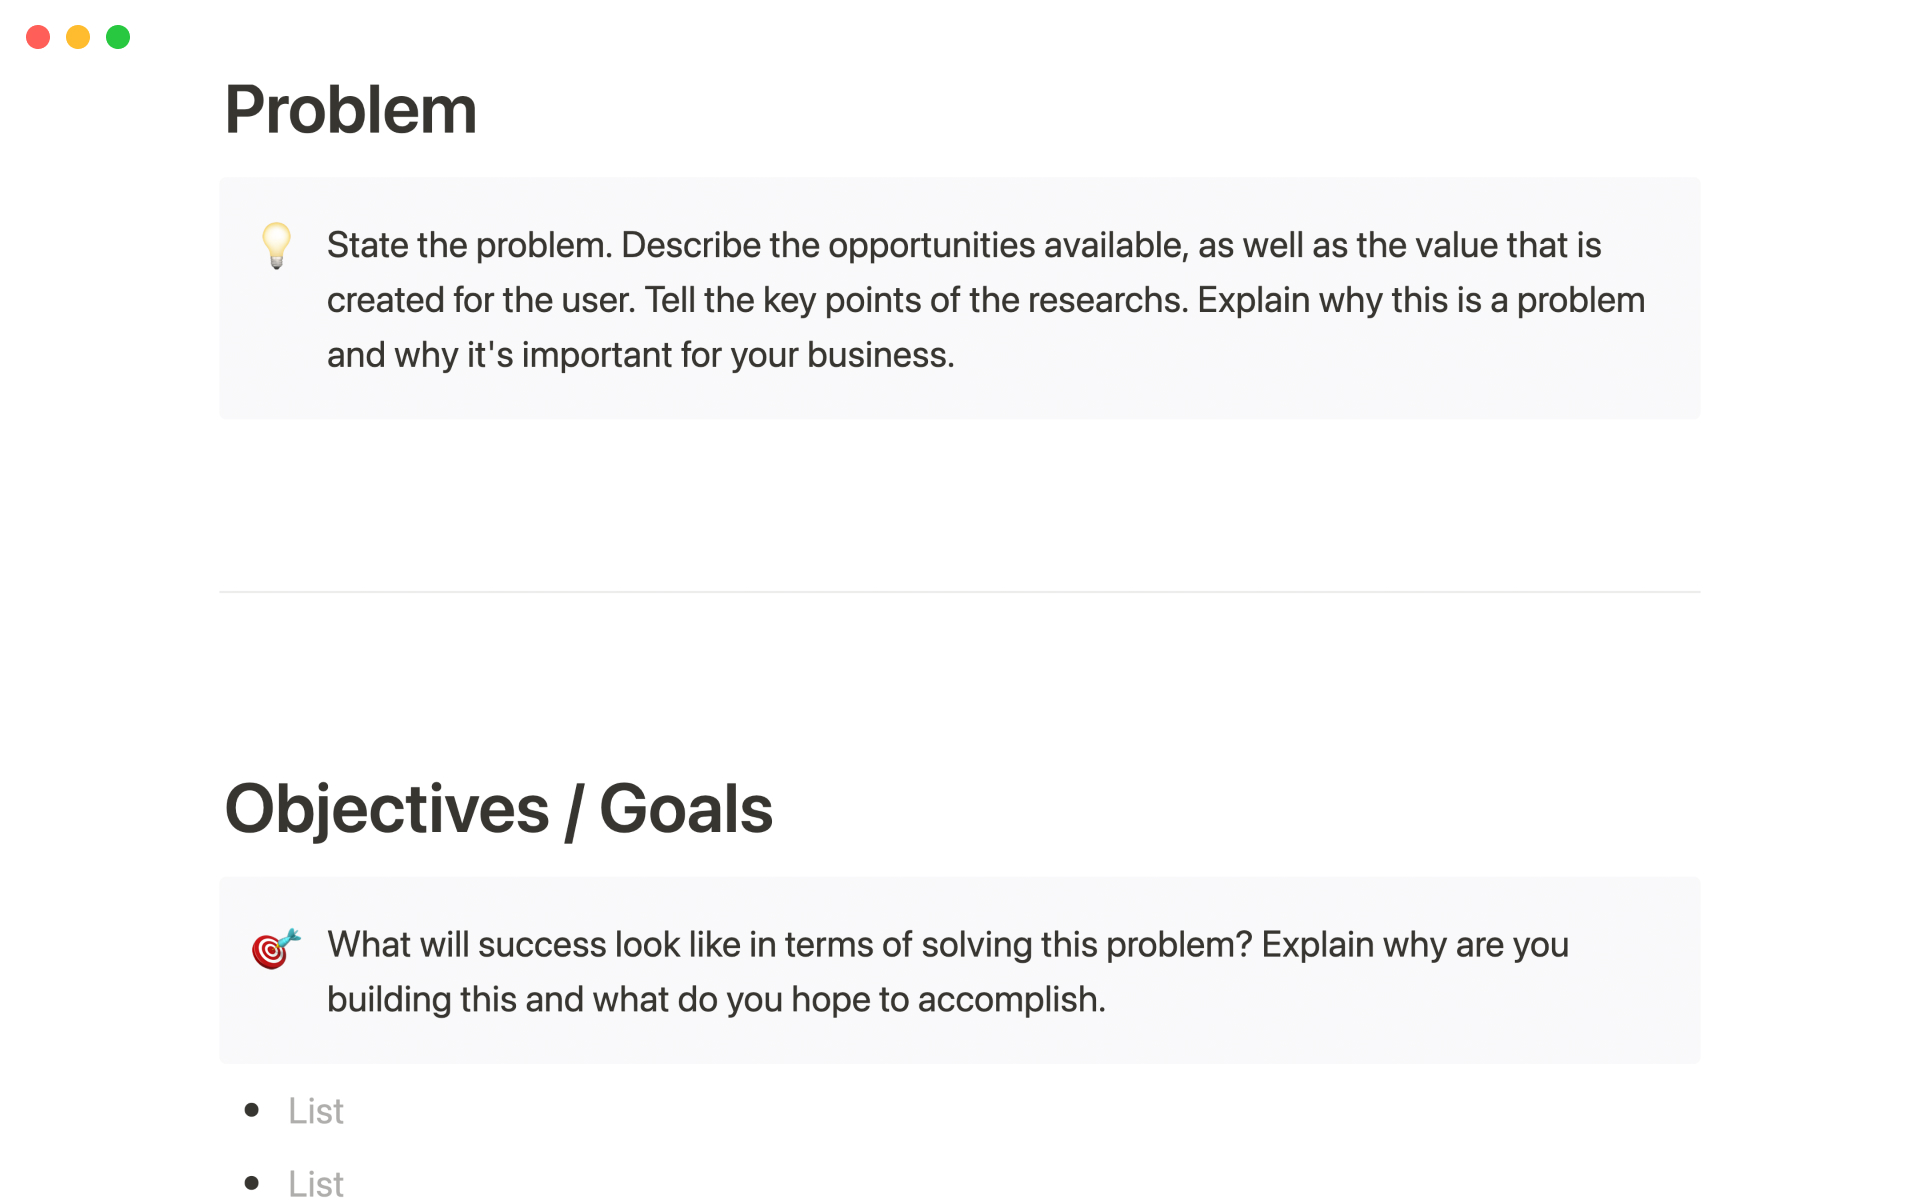 This template contains the PRD (Product Requirement Document) which is a basic requirement for product managers and digital product development teams.